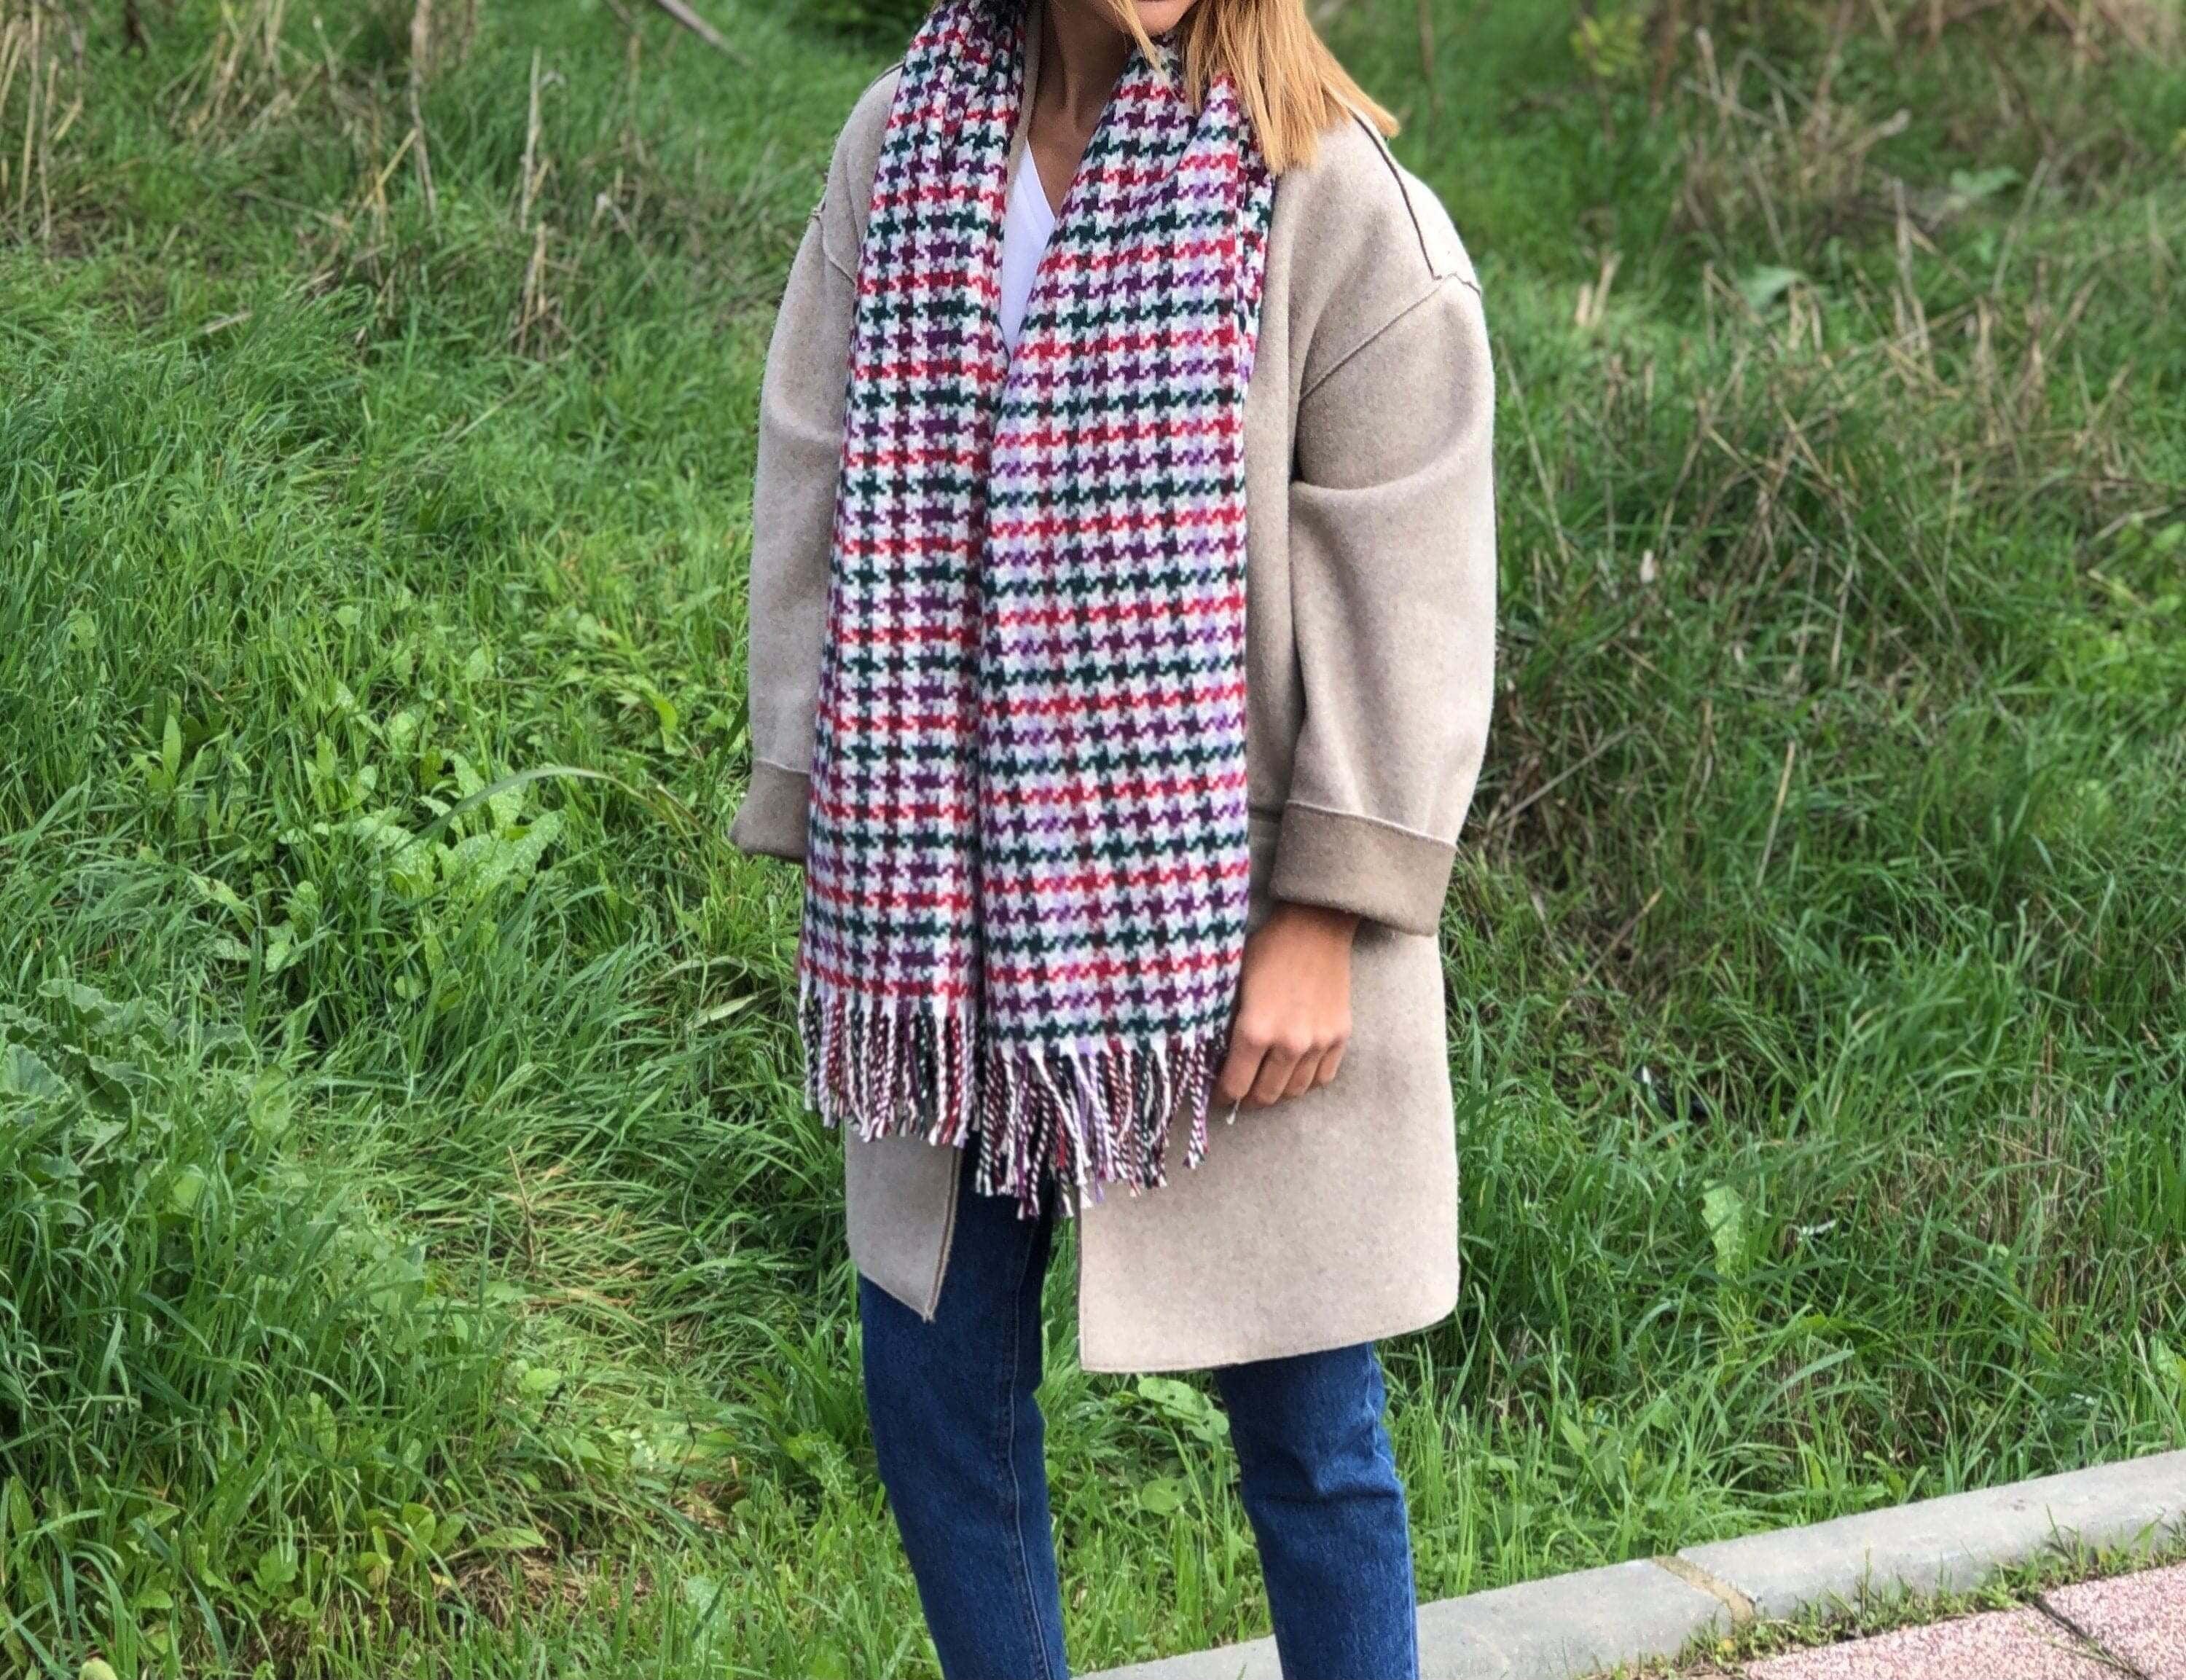 High-Quality Long Wool Striped Woven Shawl in Purple, White, and Green - Stylish Autumn/Winter Scarf and Blanket for Women available at Moyoni Design